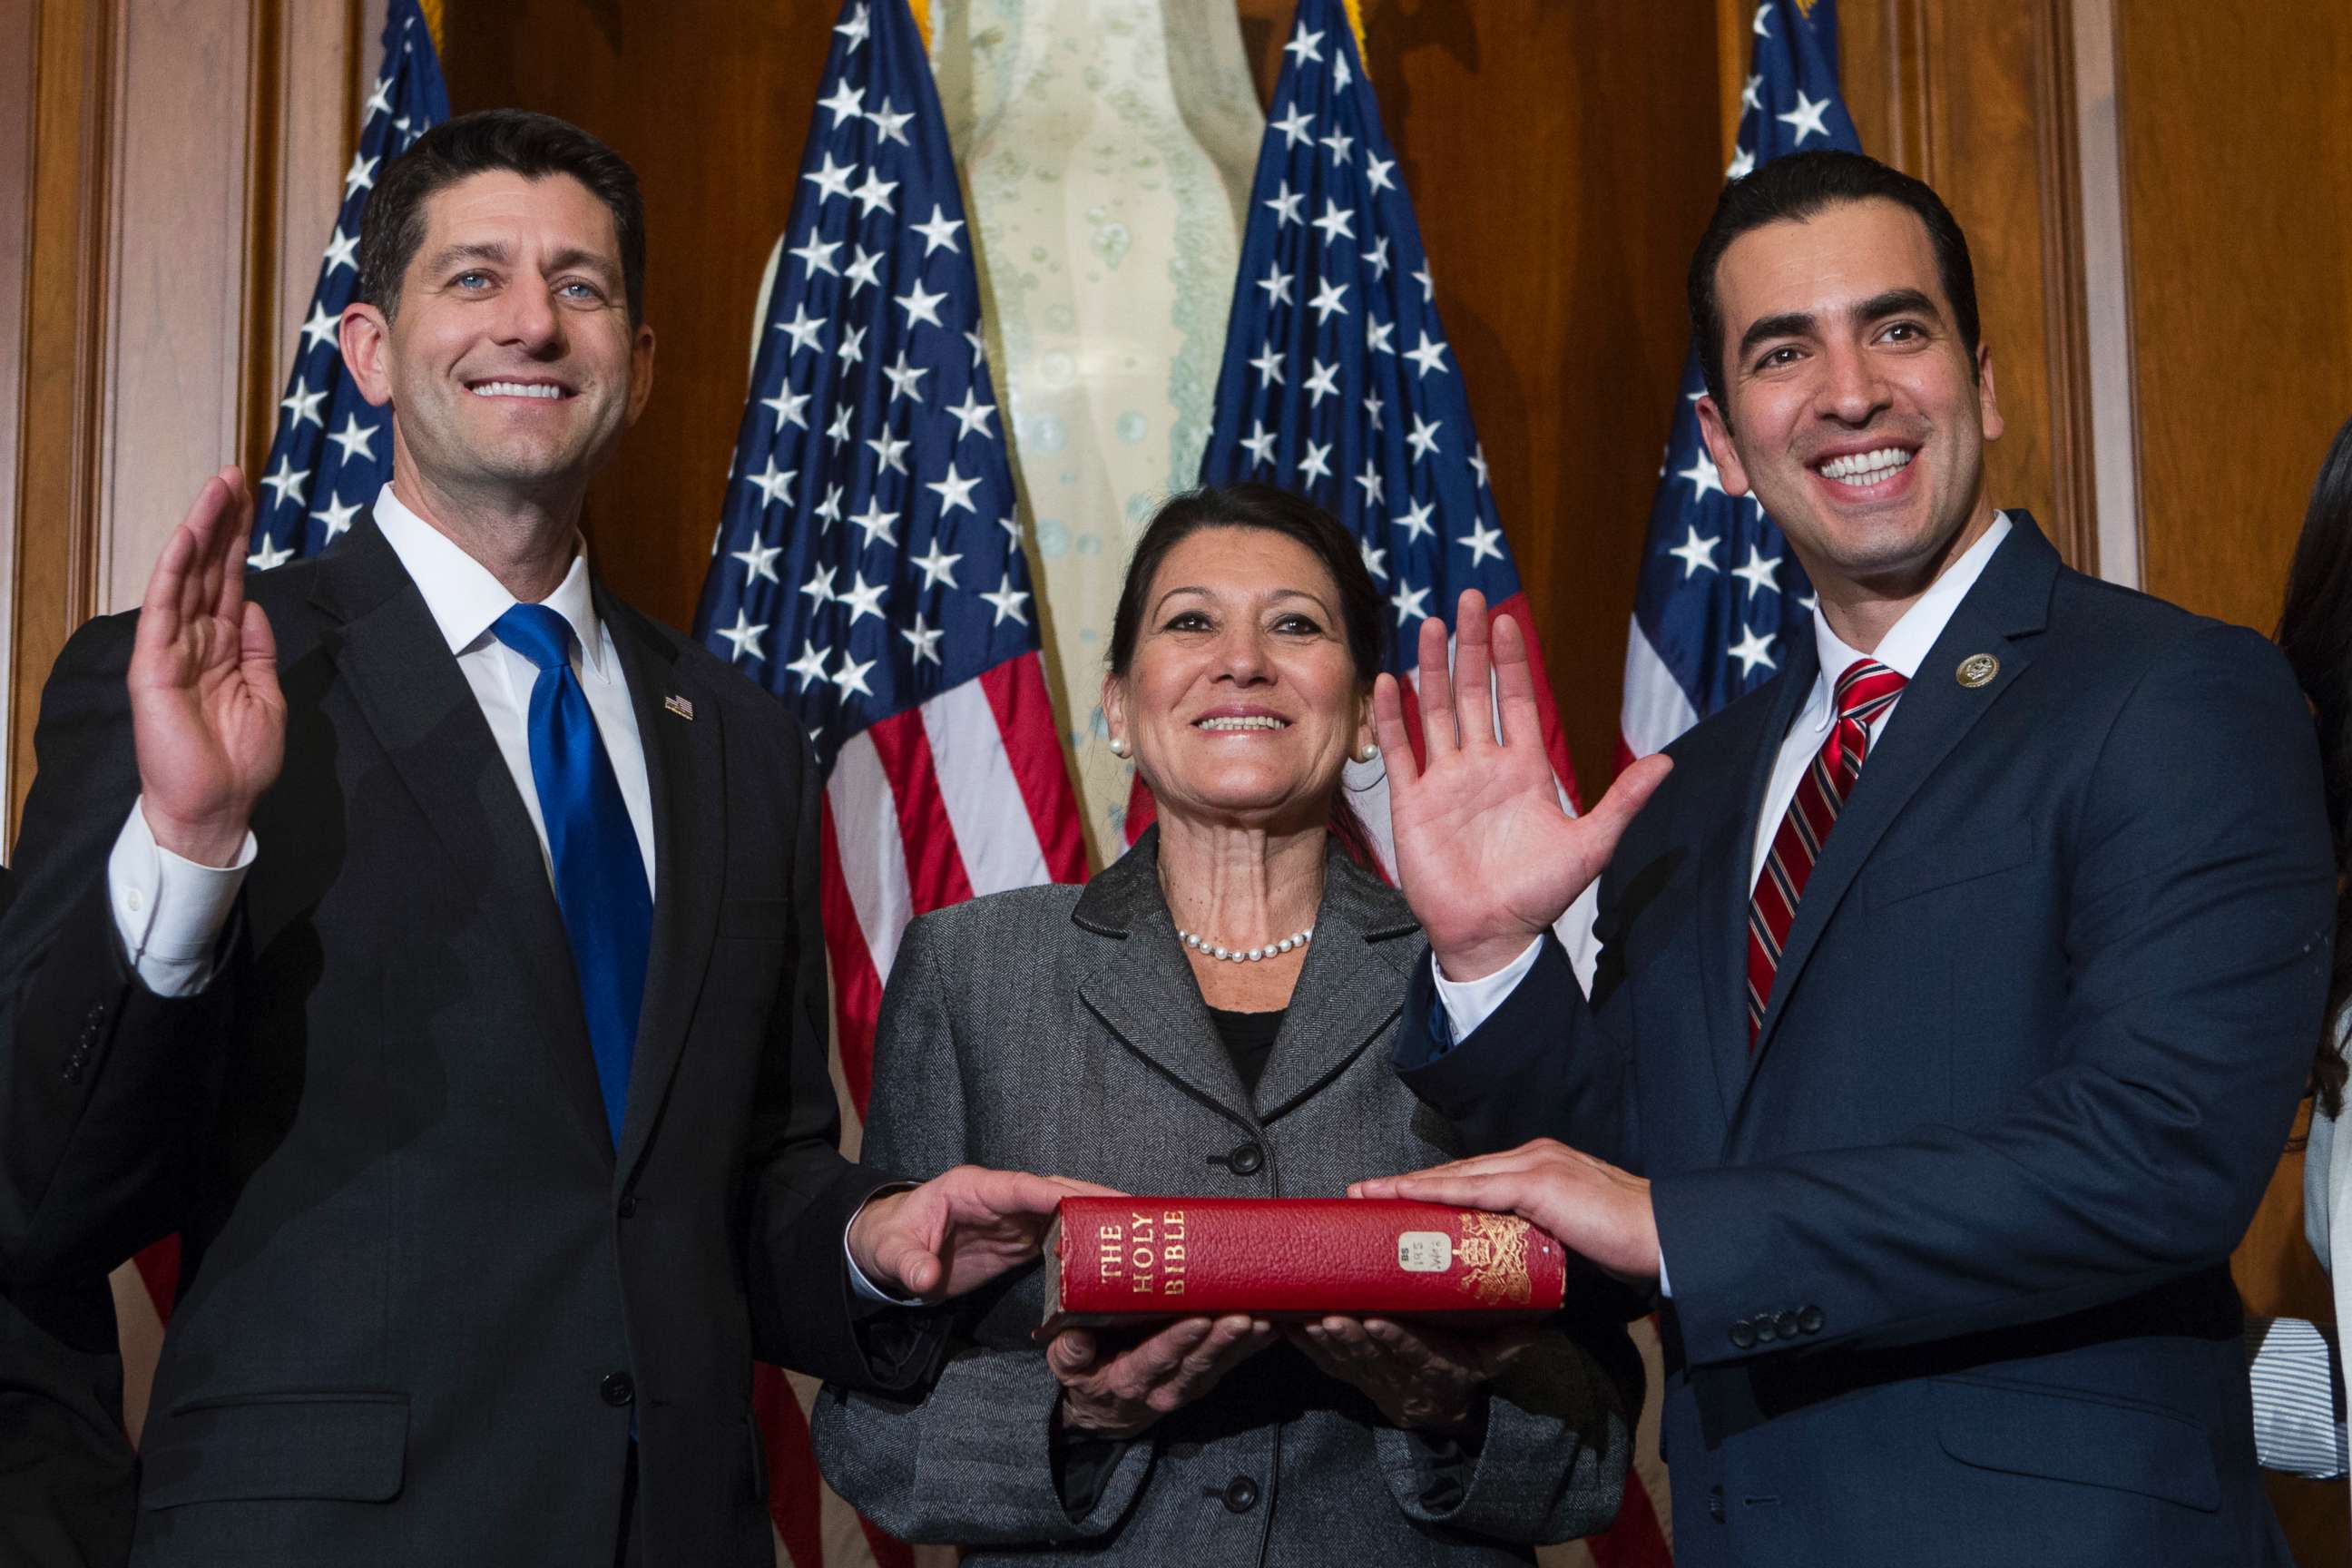 PHOTO: House Speaker Paul Ryan of Wis. administers the House oath of office to Rep. Ruben Kihuen, D-Nev., during a mock swearing in ceremony on Capitol Hill in Washington, Tuesday, Jan. 3, 2017, as the 115th Congress began. 